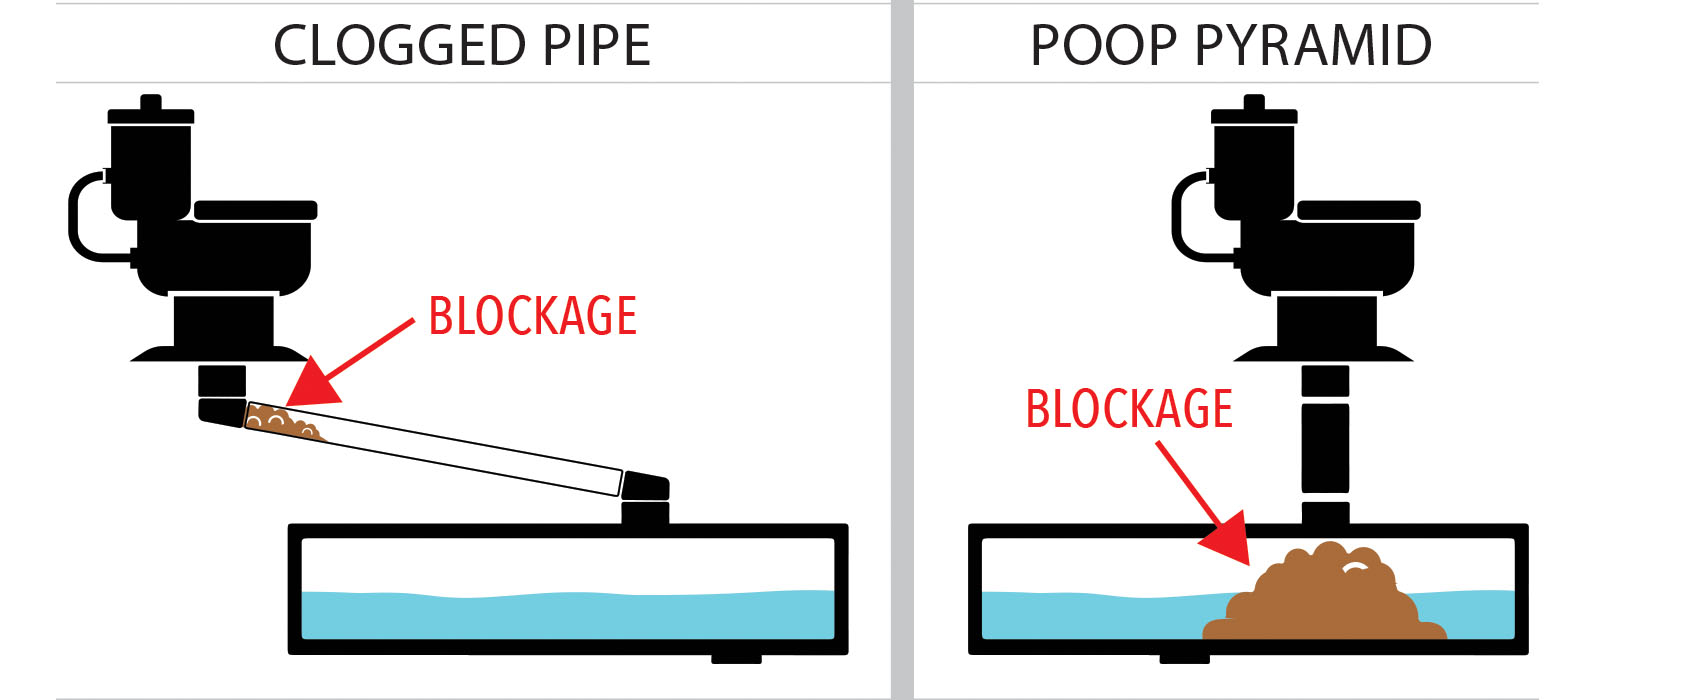 Clogged RV sewer pipe and poop pyramid clog diagrams